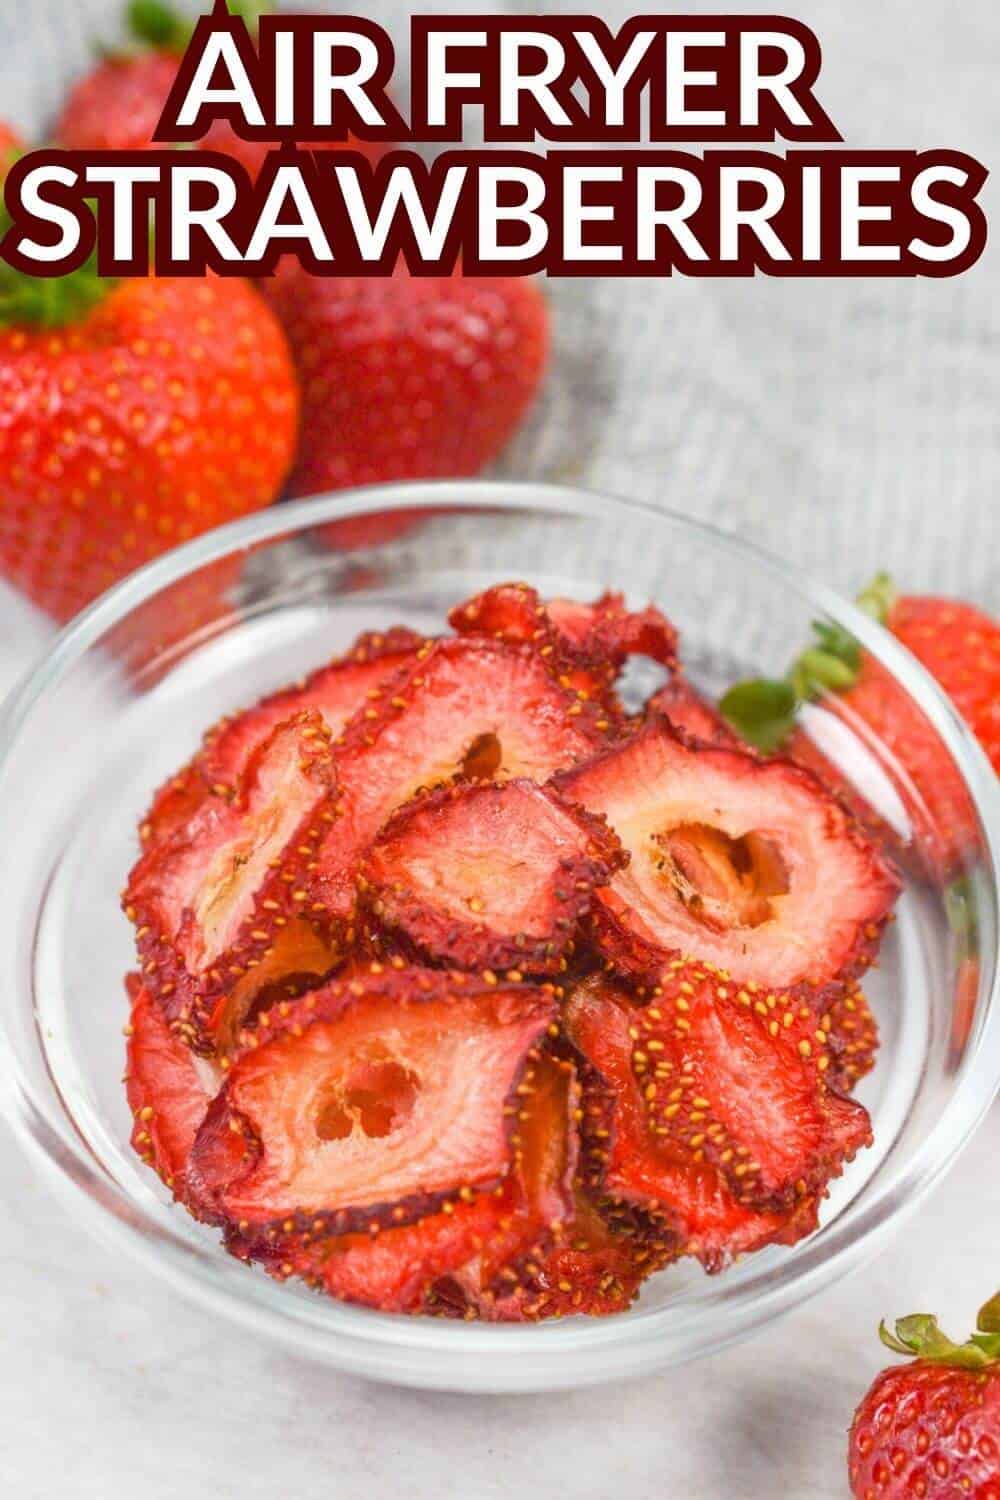 Air fryer strawberries in glass bowl with recipe title text overlay.